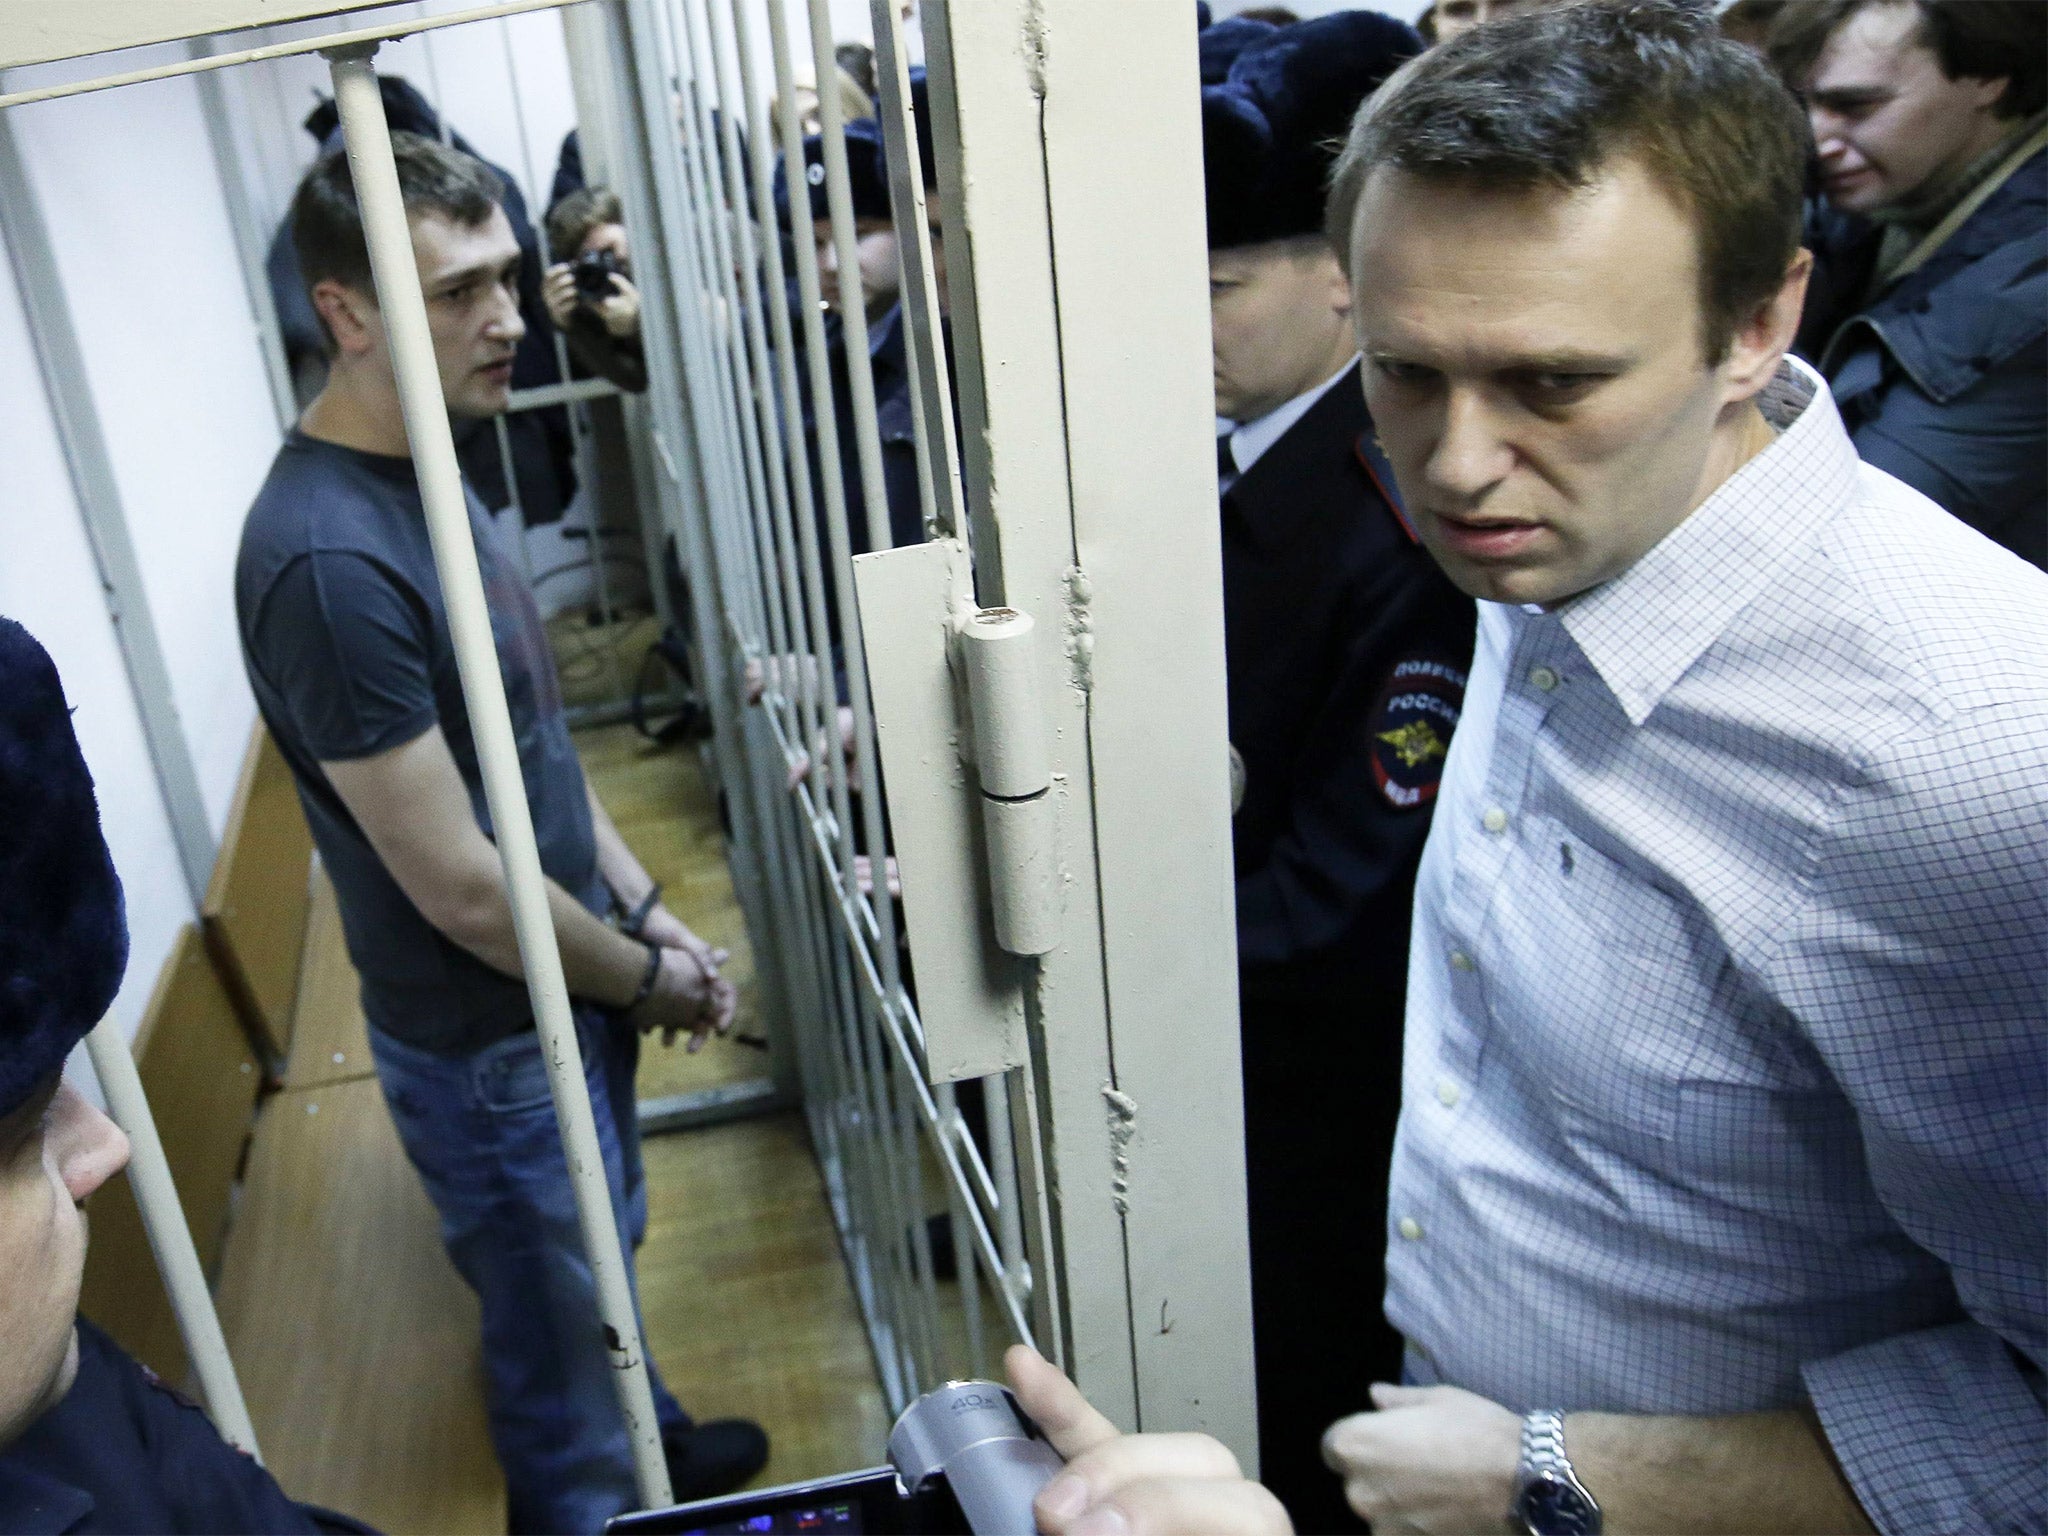 Alexei Navalny (right) and his brother and co-defendant Oleg (inside the cage) at a court hearing in Moscow yesterday; Oleg received a custodial sentence, Alexei a suspended sentence